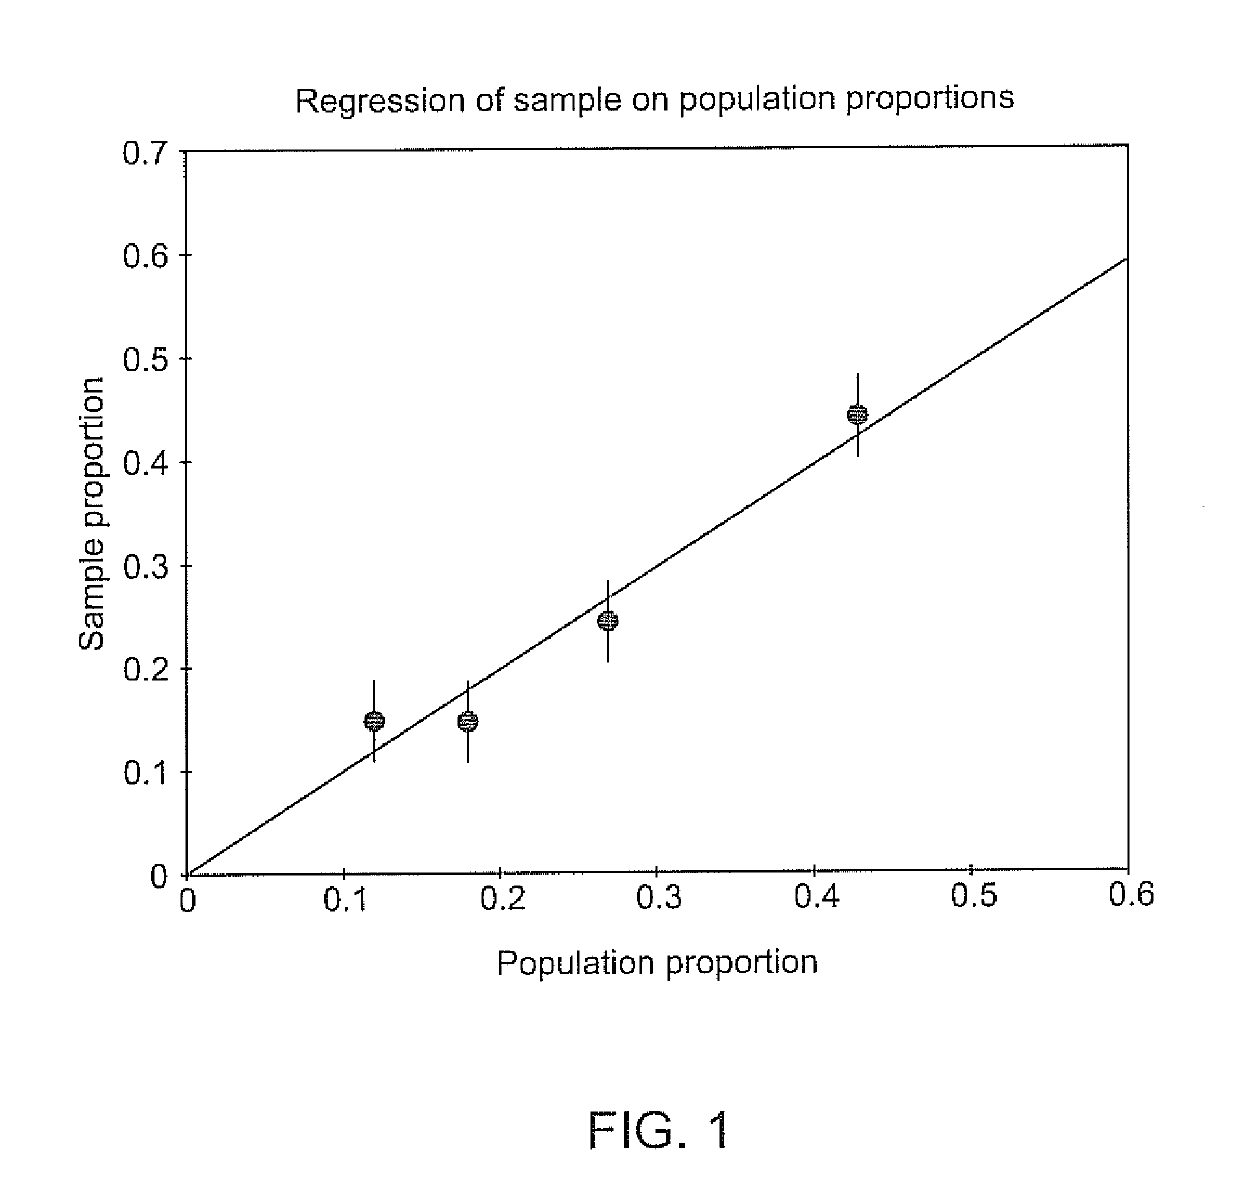 Population-sample regression in the estimation of population proportions